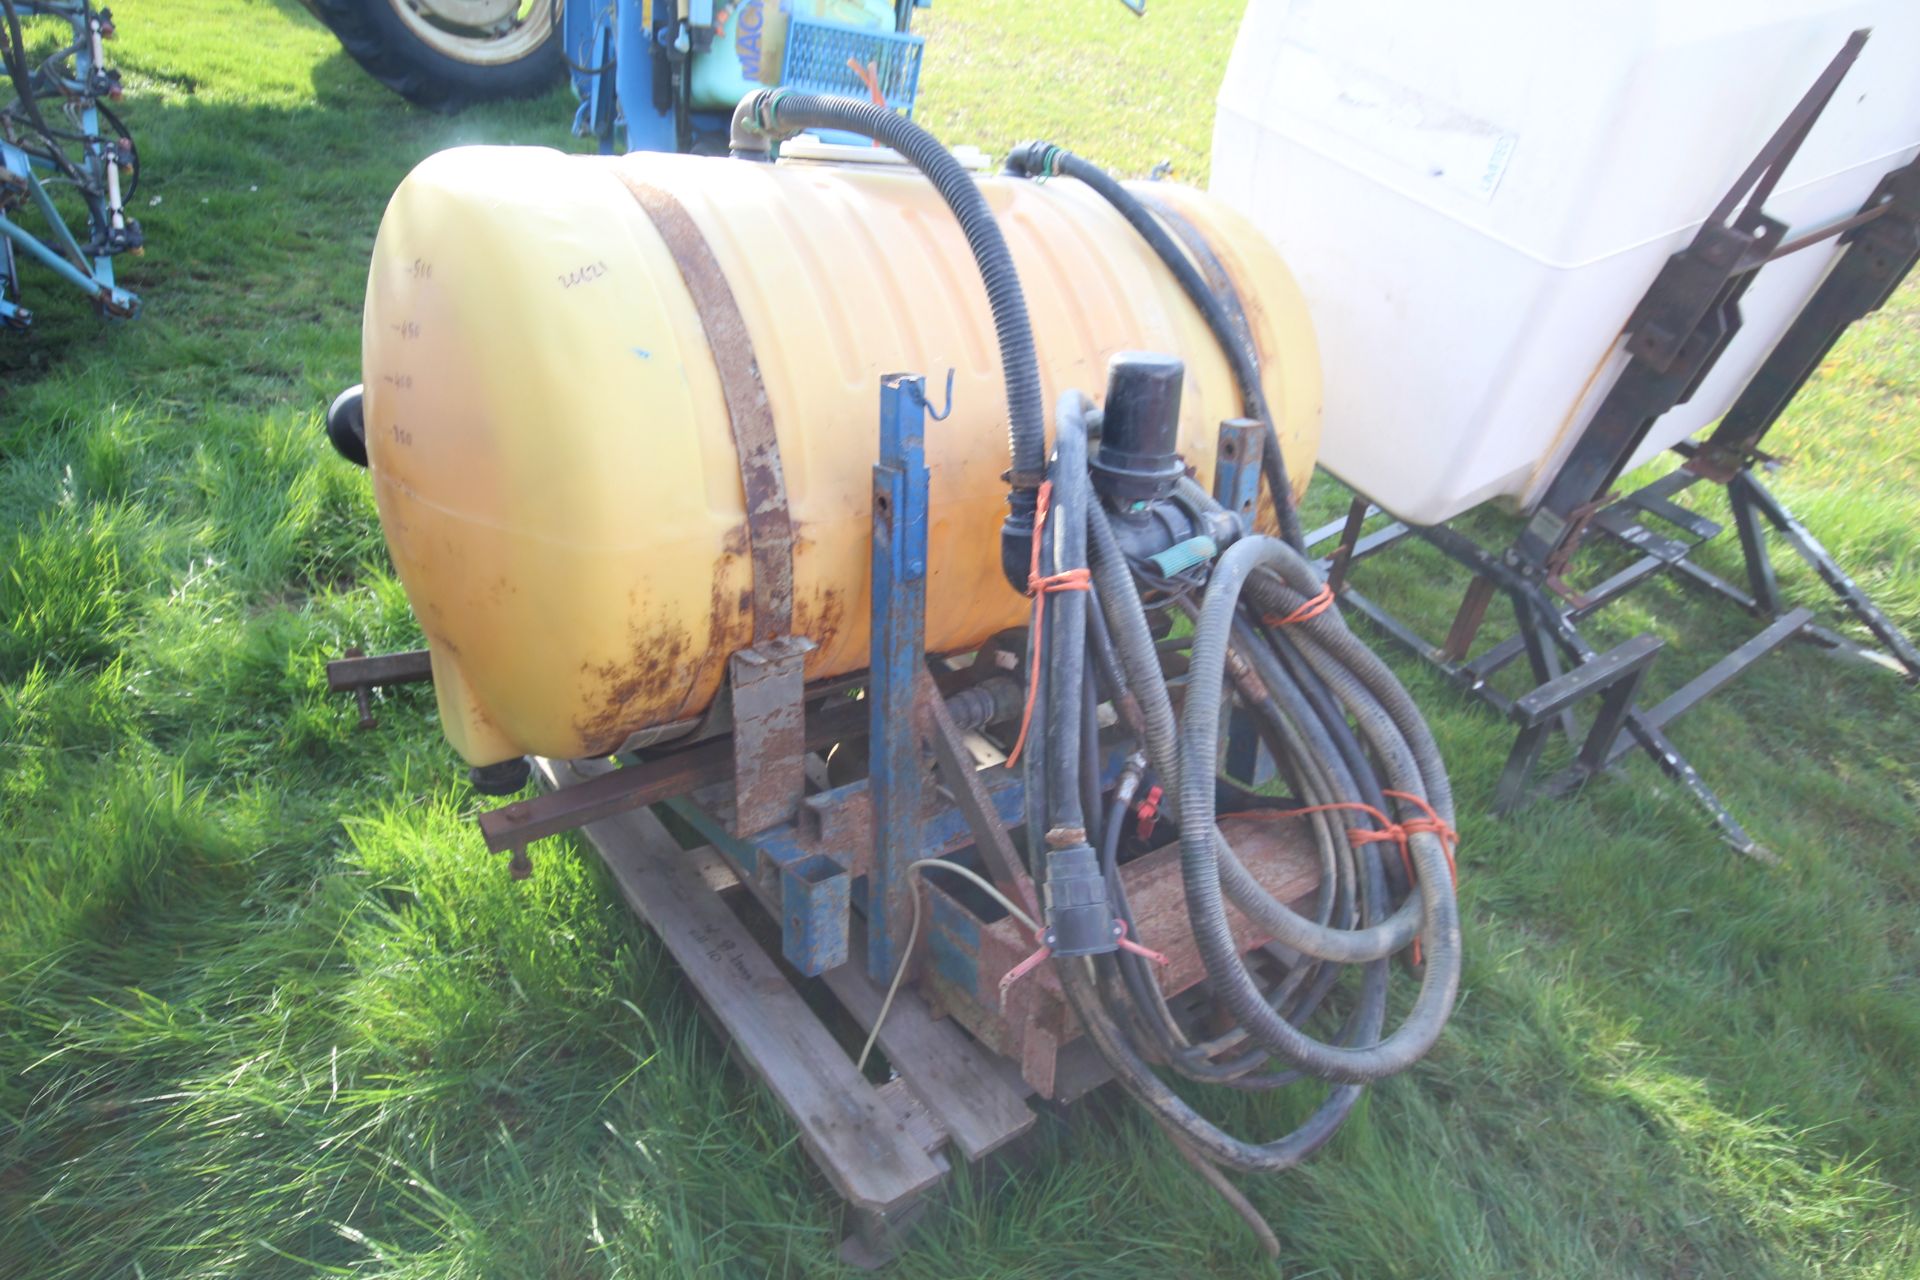 500L front mouted sprayer/ liquid fertiliser tank. With pump and pipework. Manual held. V